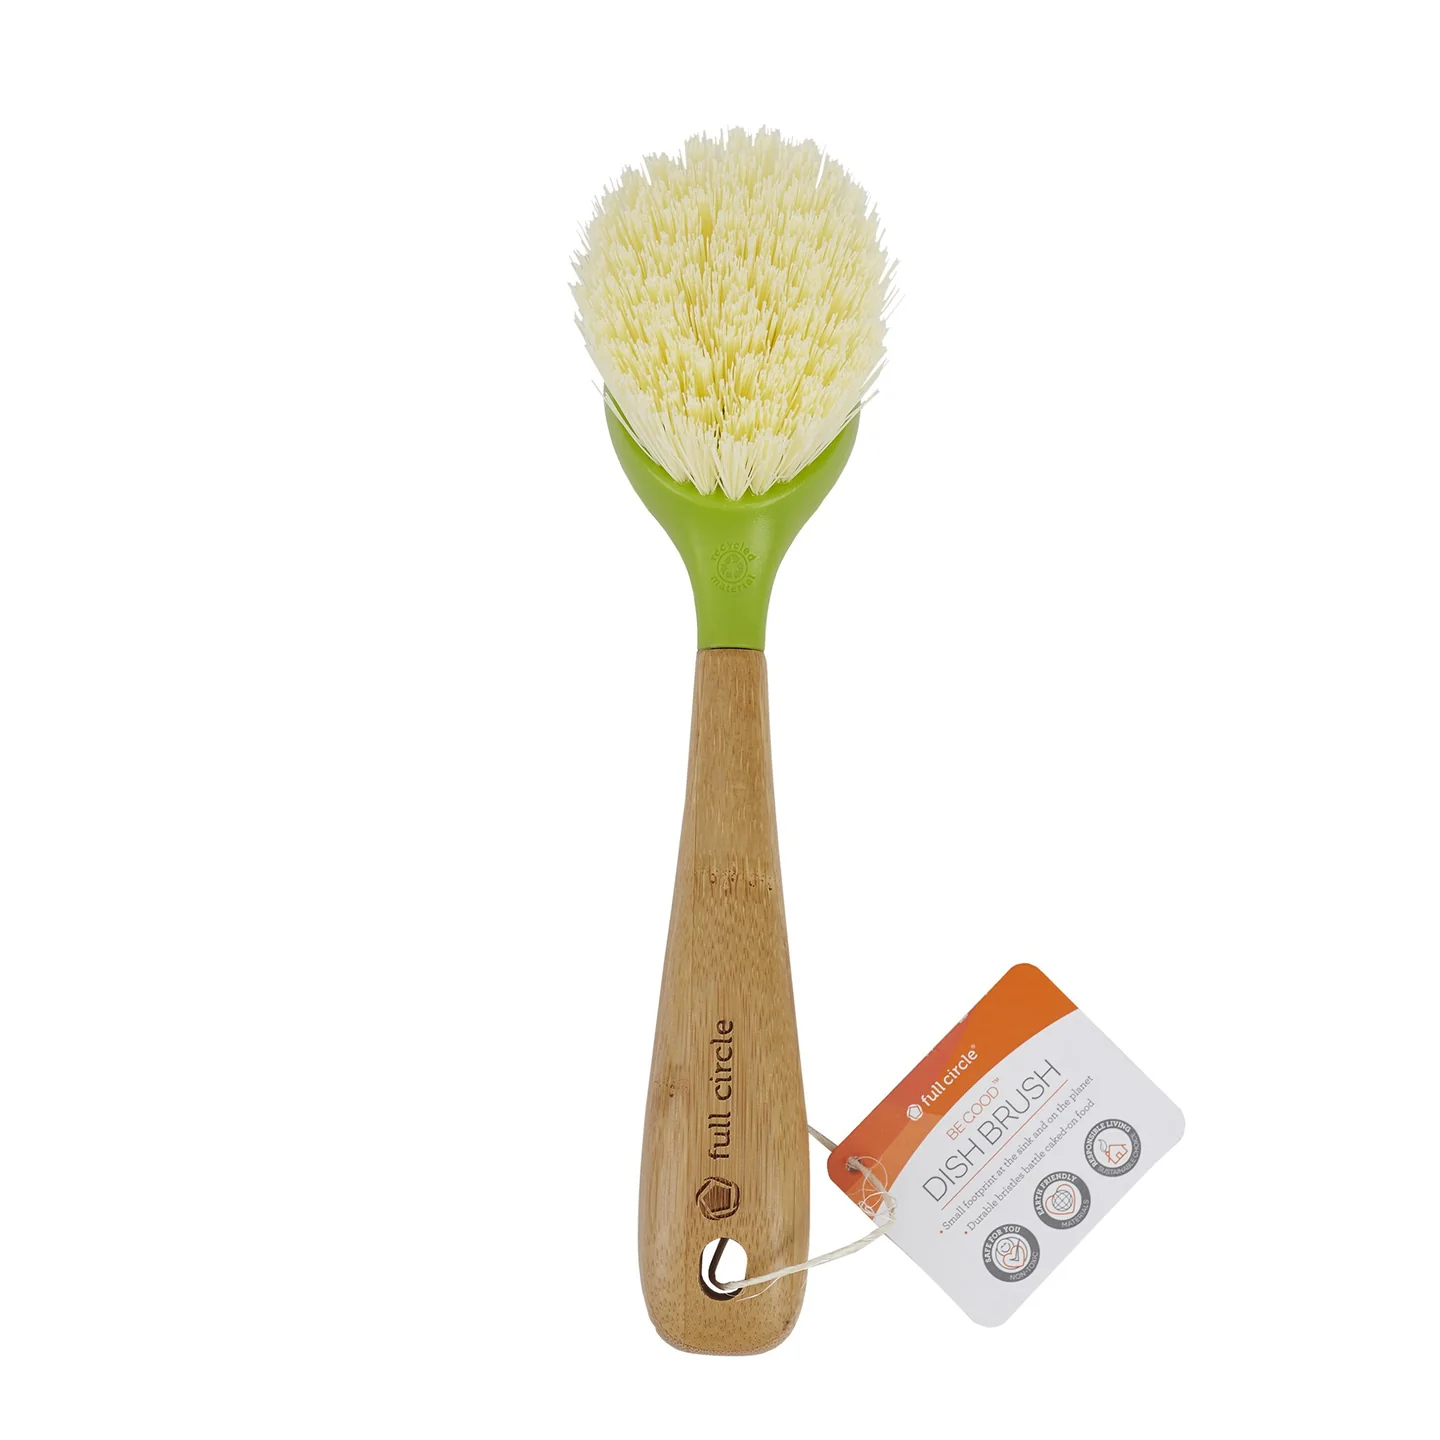 Full Circle Be Good Bamboo & Recycled Plastic Dish Brush -Non-Stick  Cookware Safe - Green 